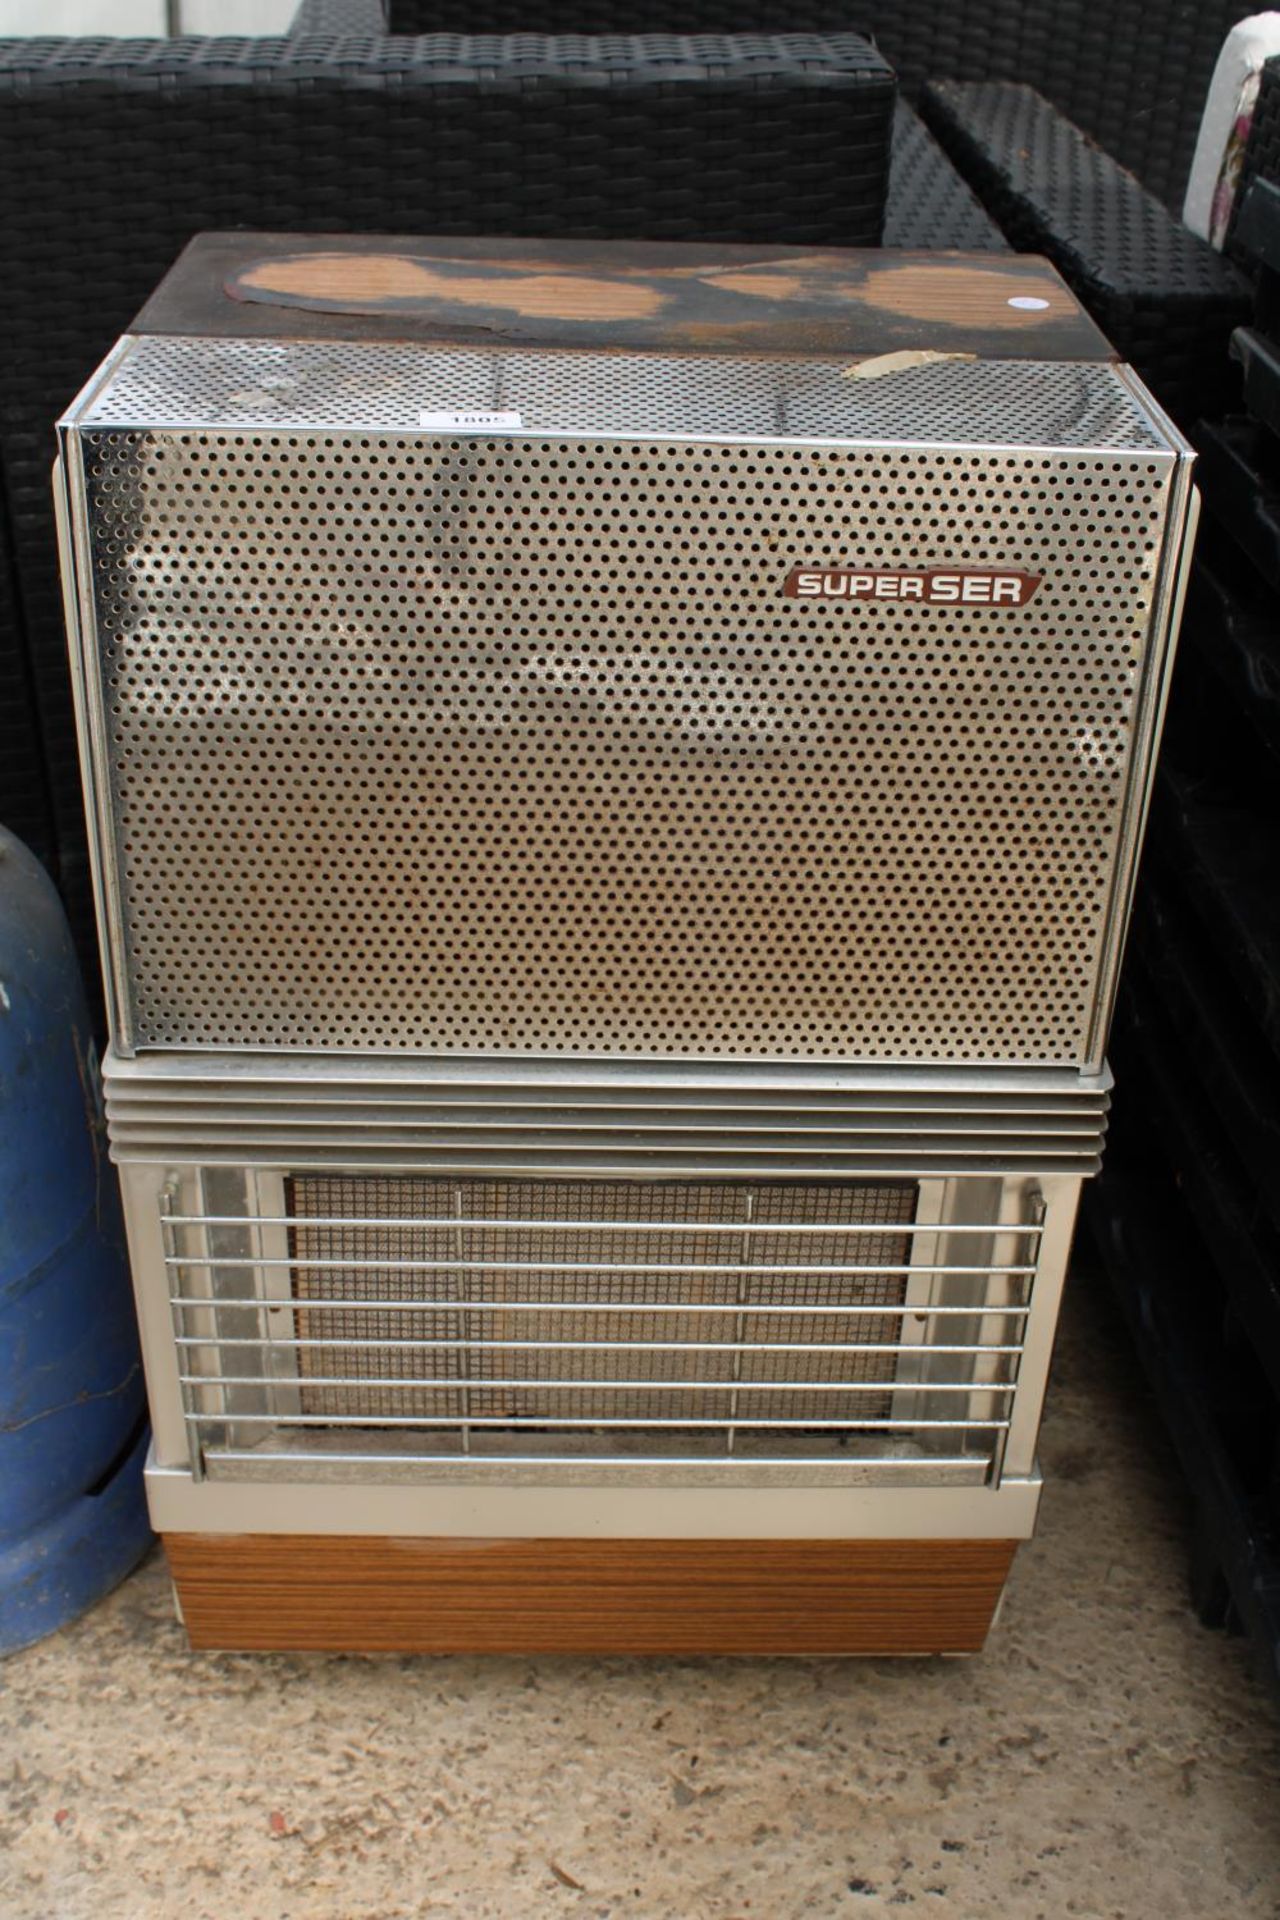 A SUPERSER GAS HEATER AND BOTTLE - Image 2 of 3